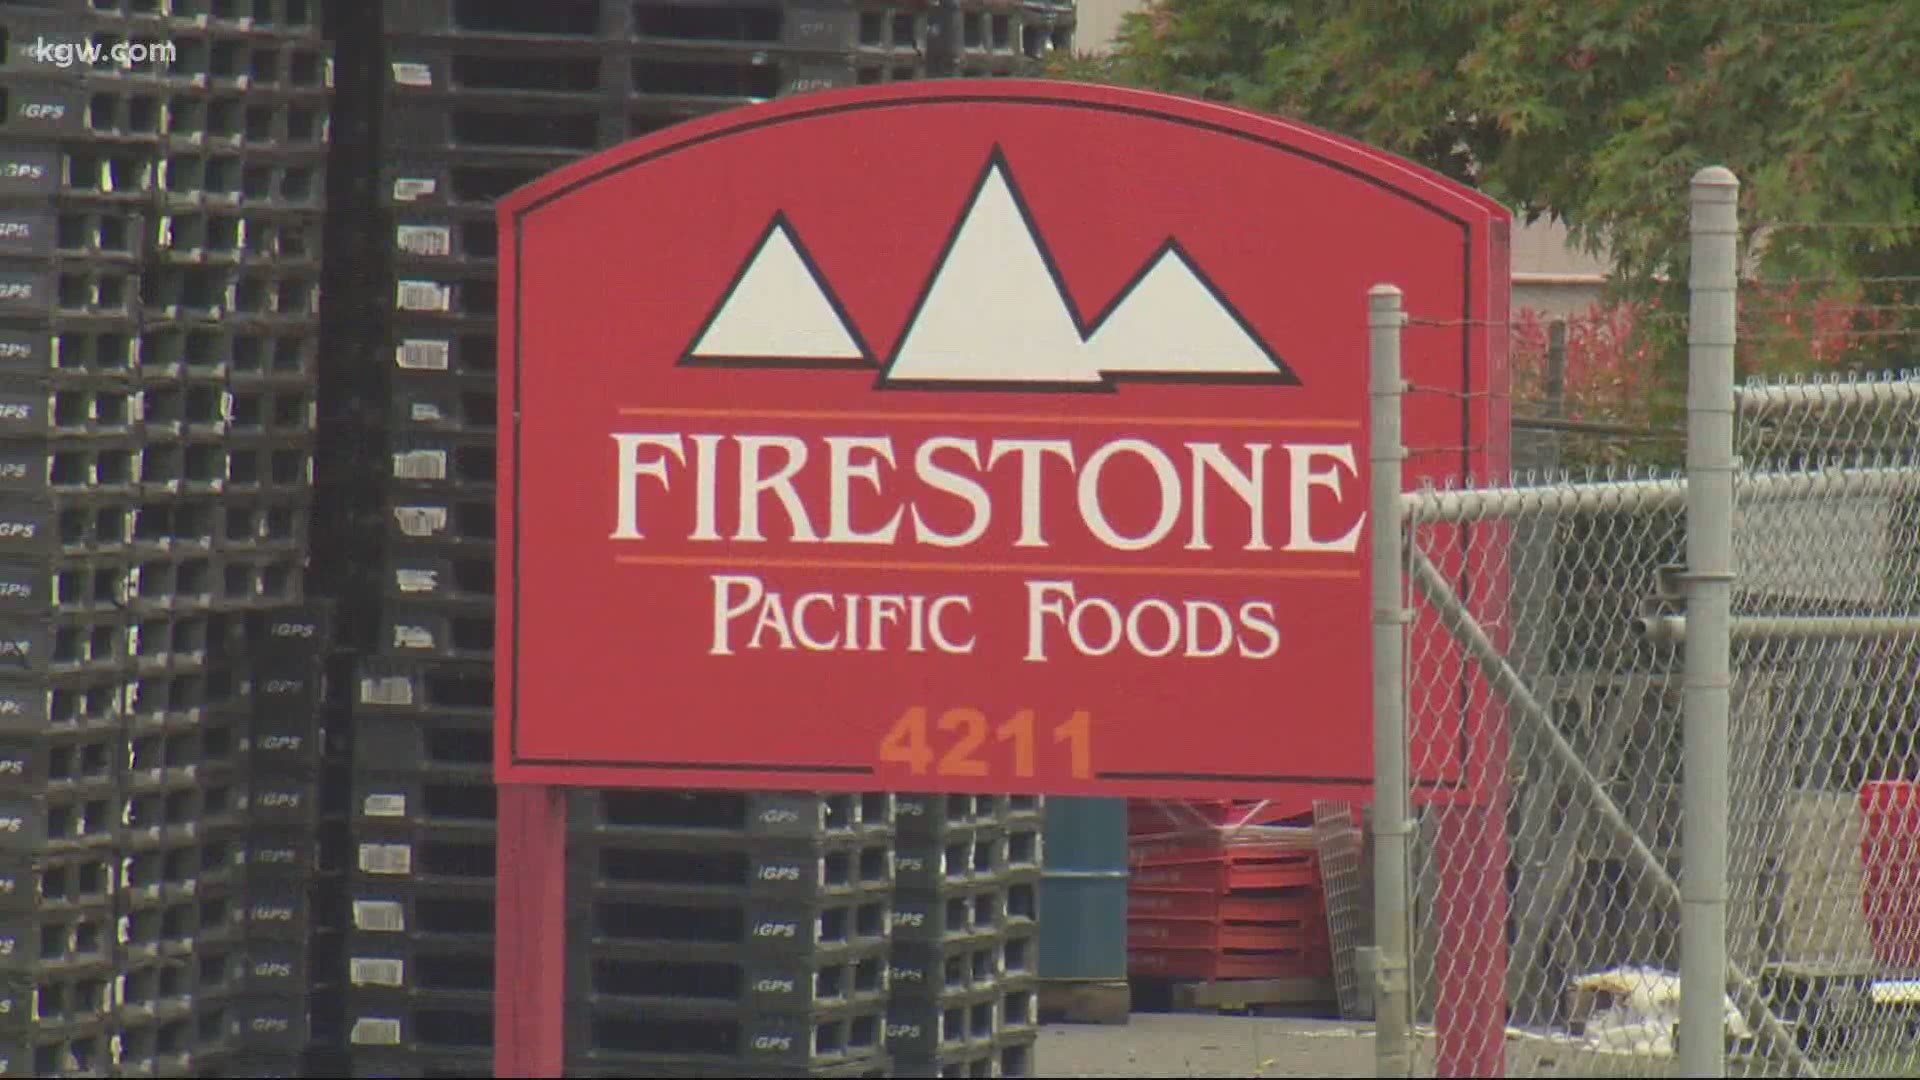 Of those 84 people, 69 are employees at Firestone Pacific Foods. The other 15 people are close contacts of workers who tested positive.